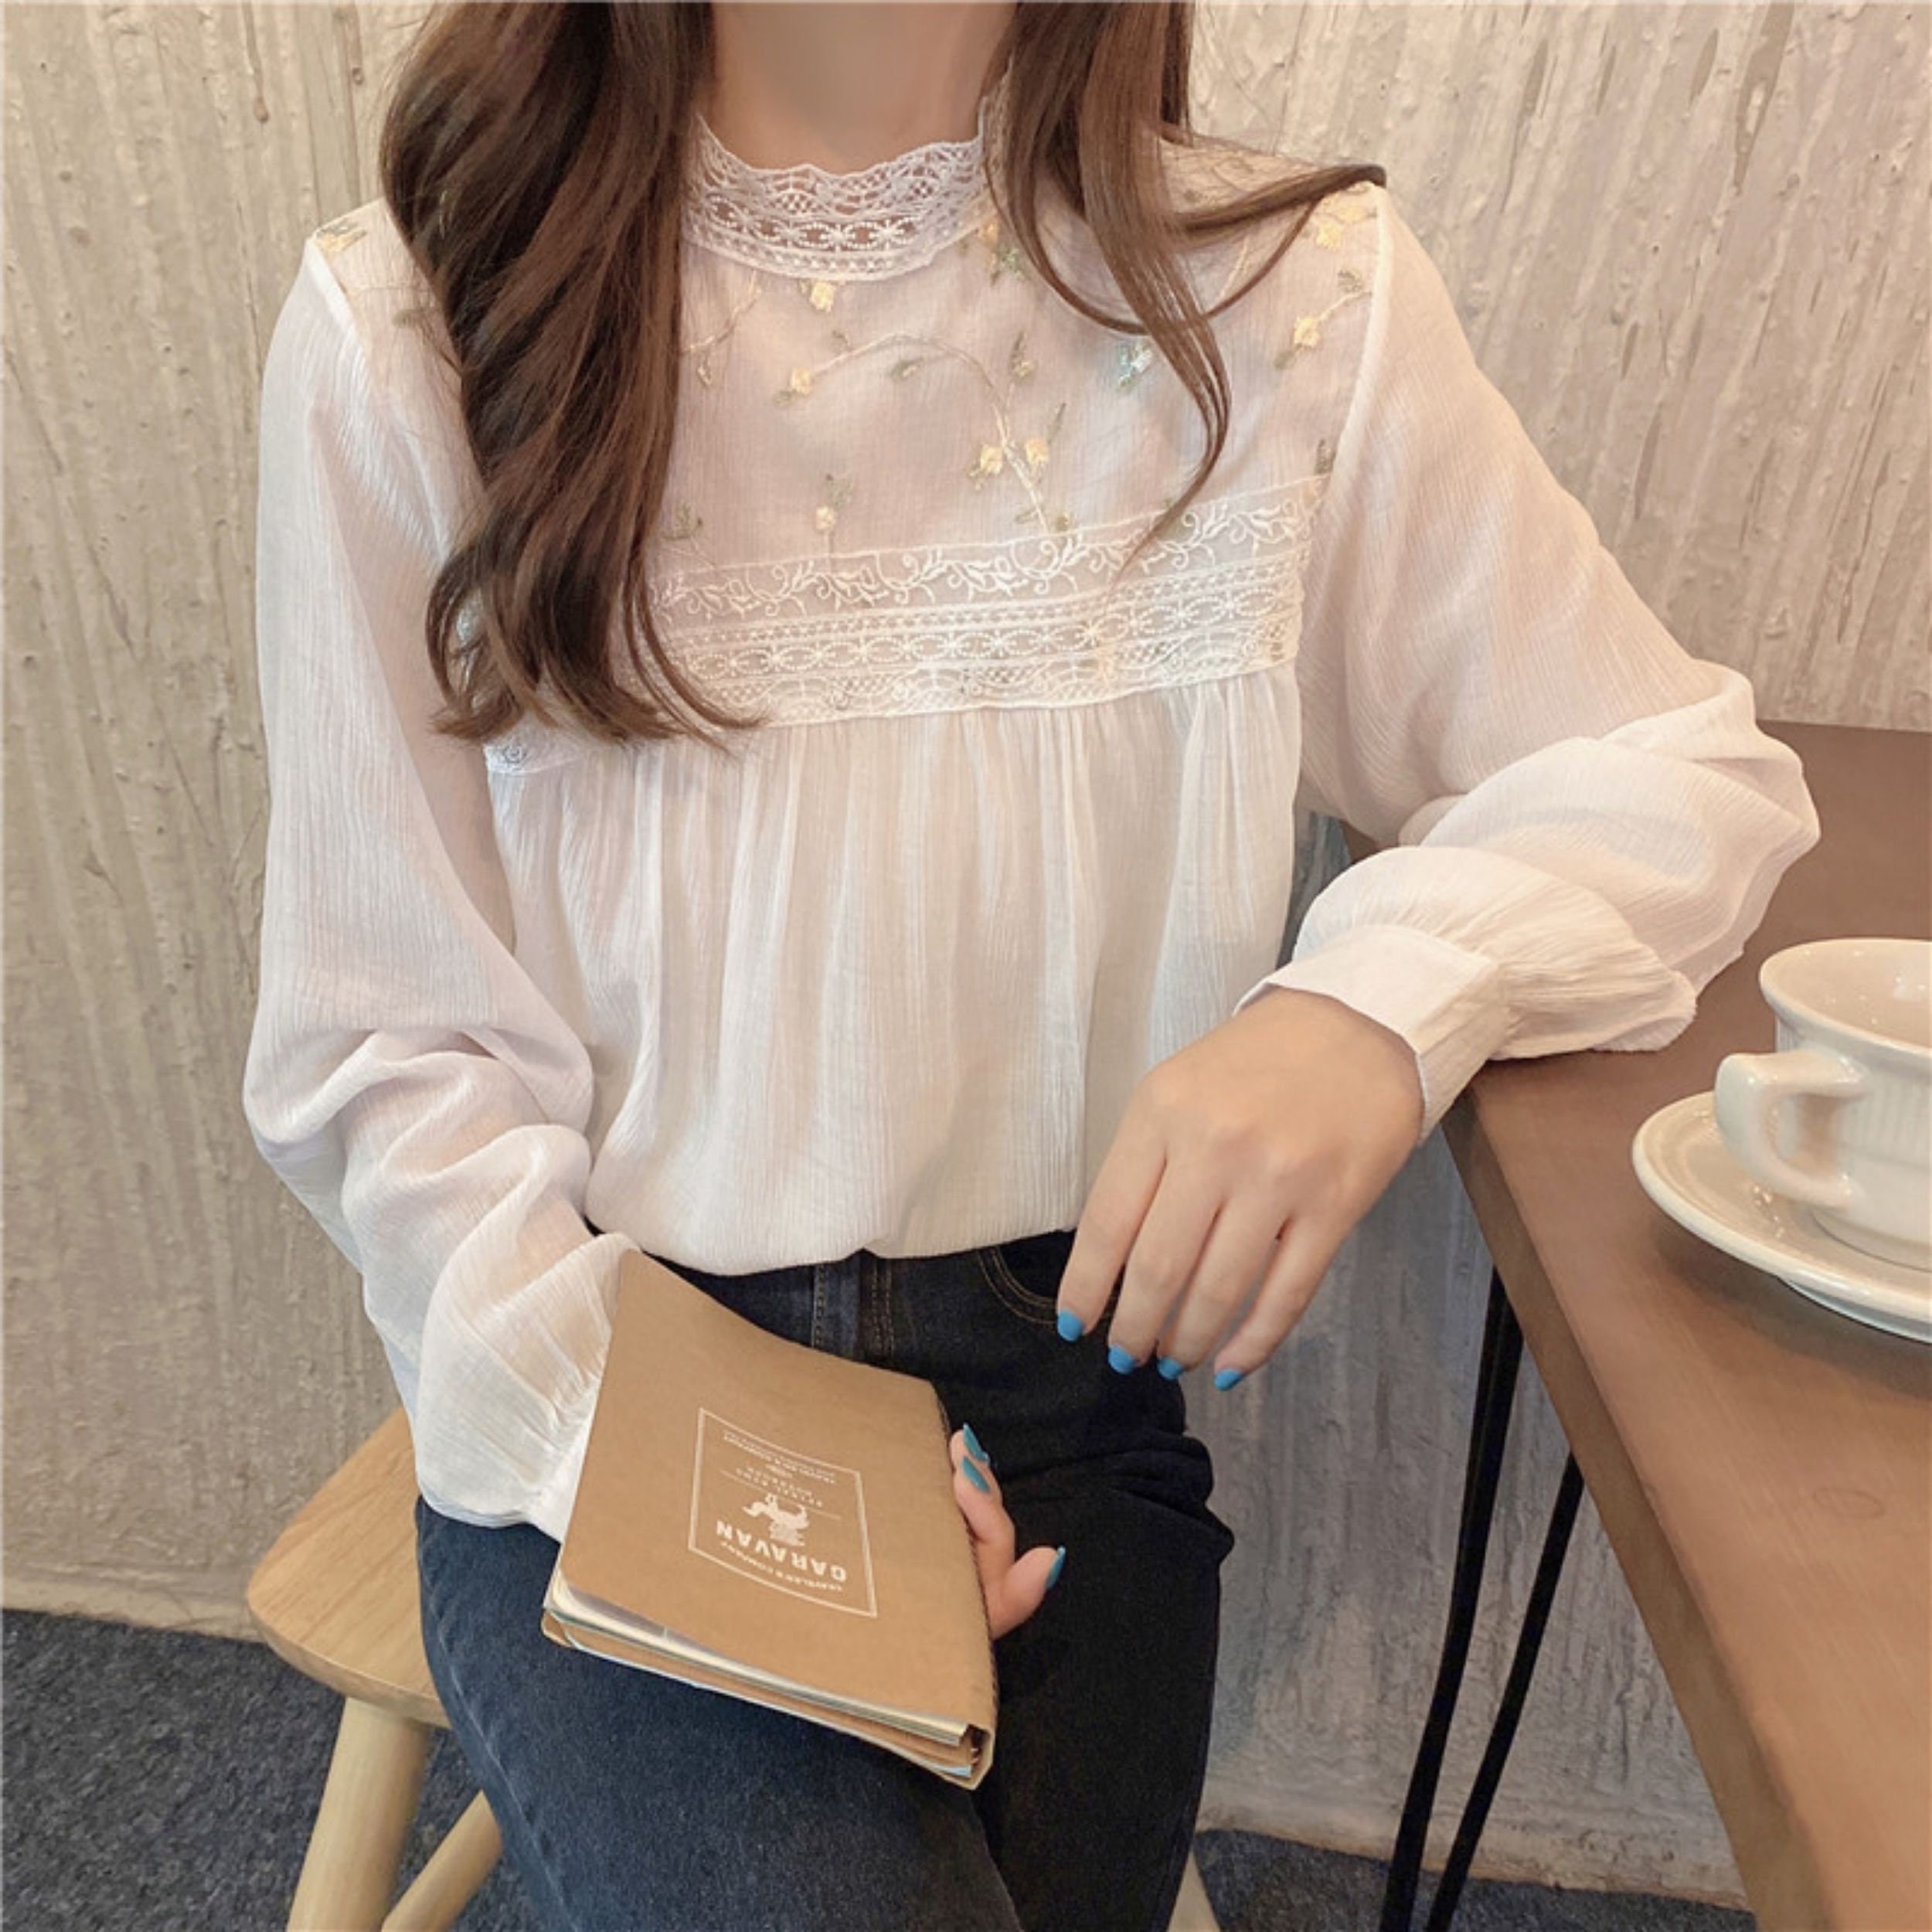 Embroidered Lace Long Sleeve Shirt Women Summer Blouse - Etsy